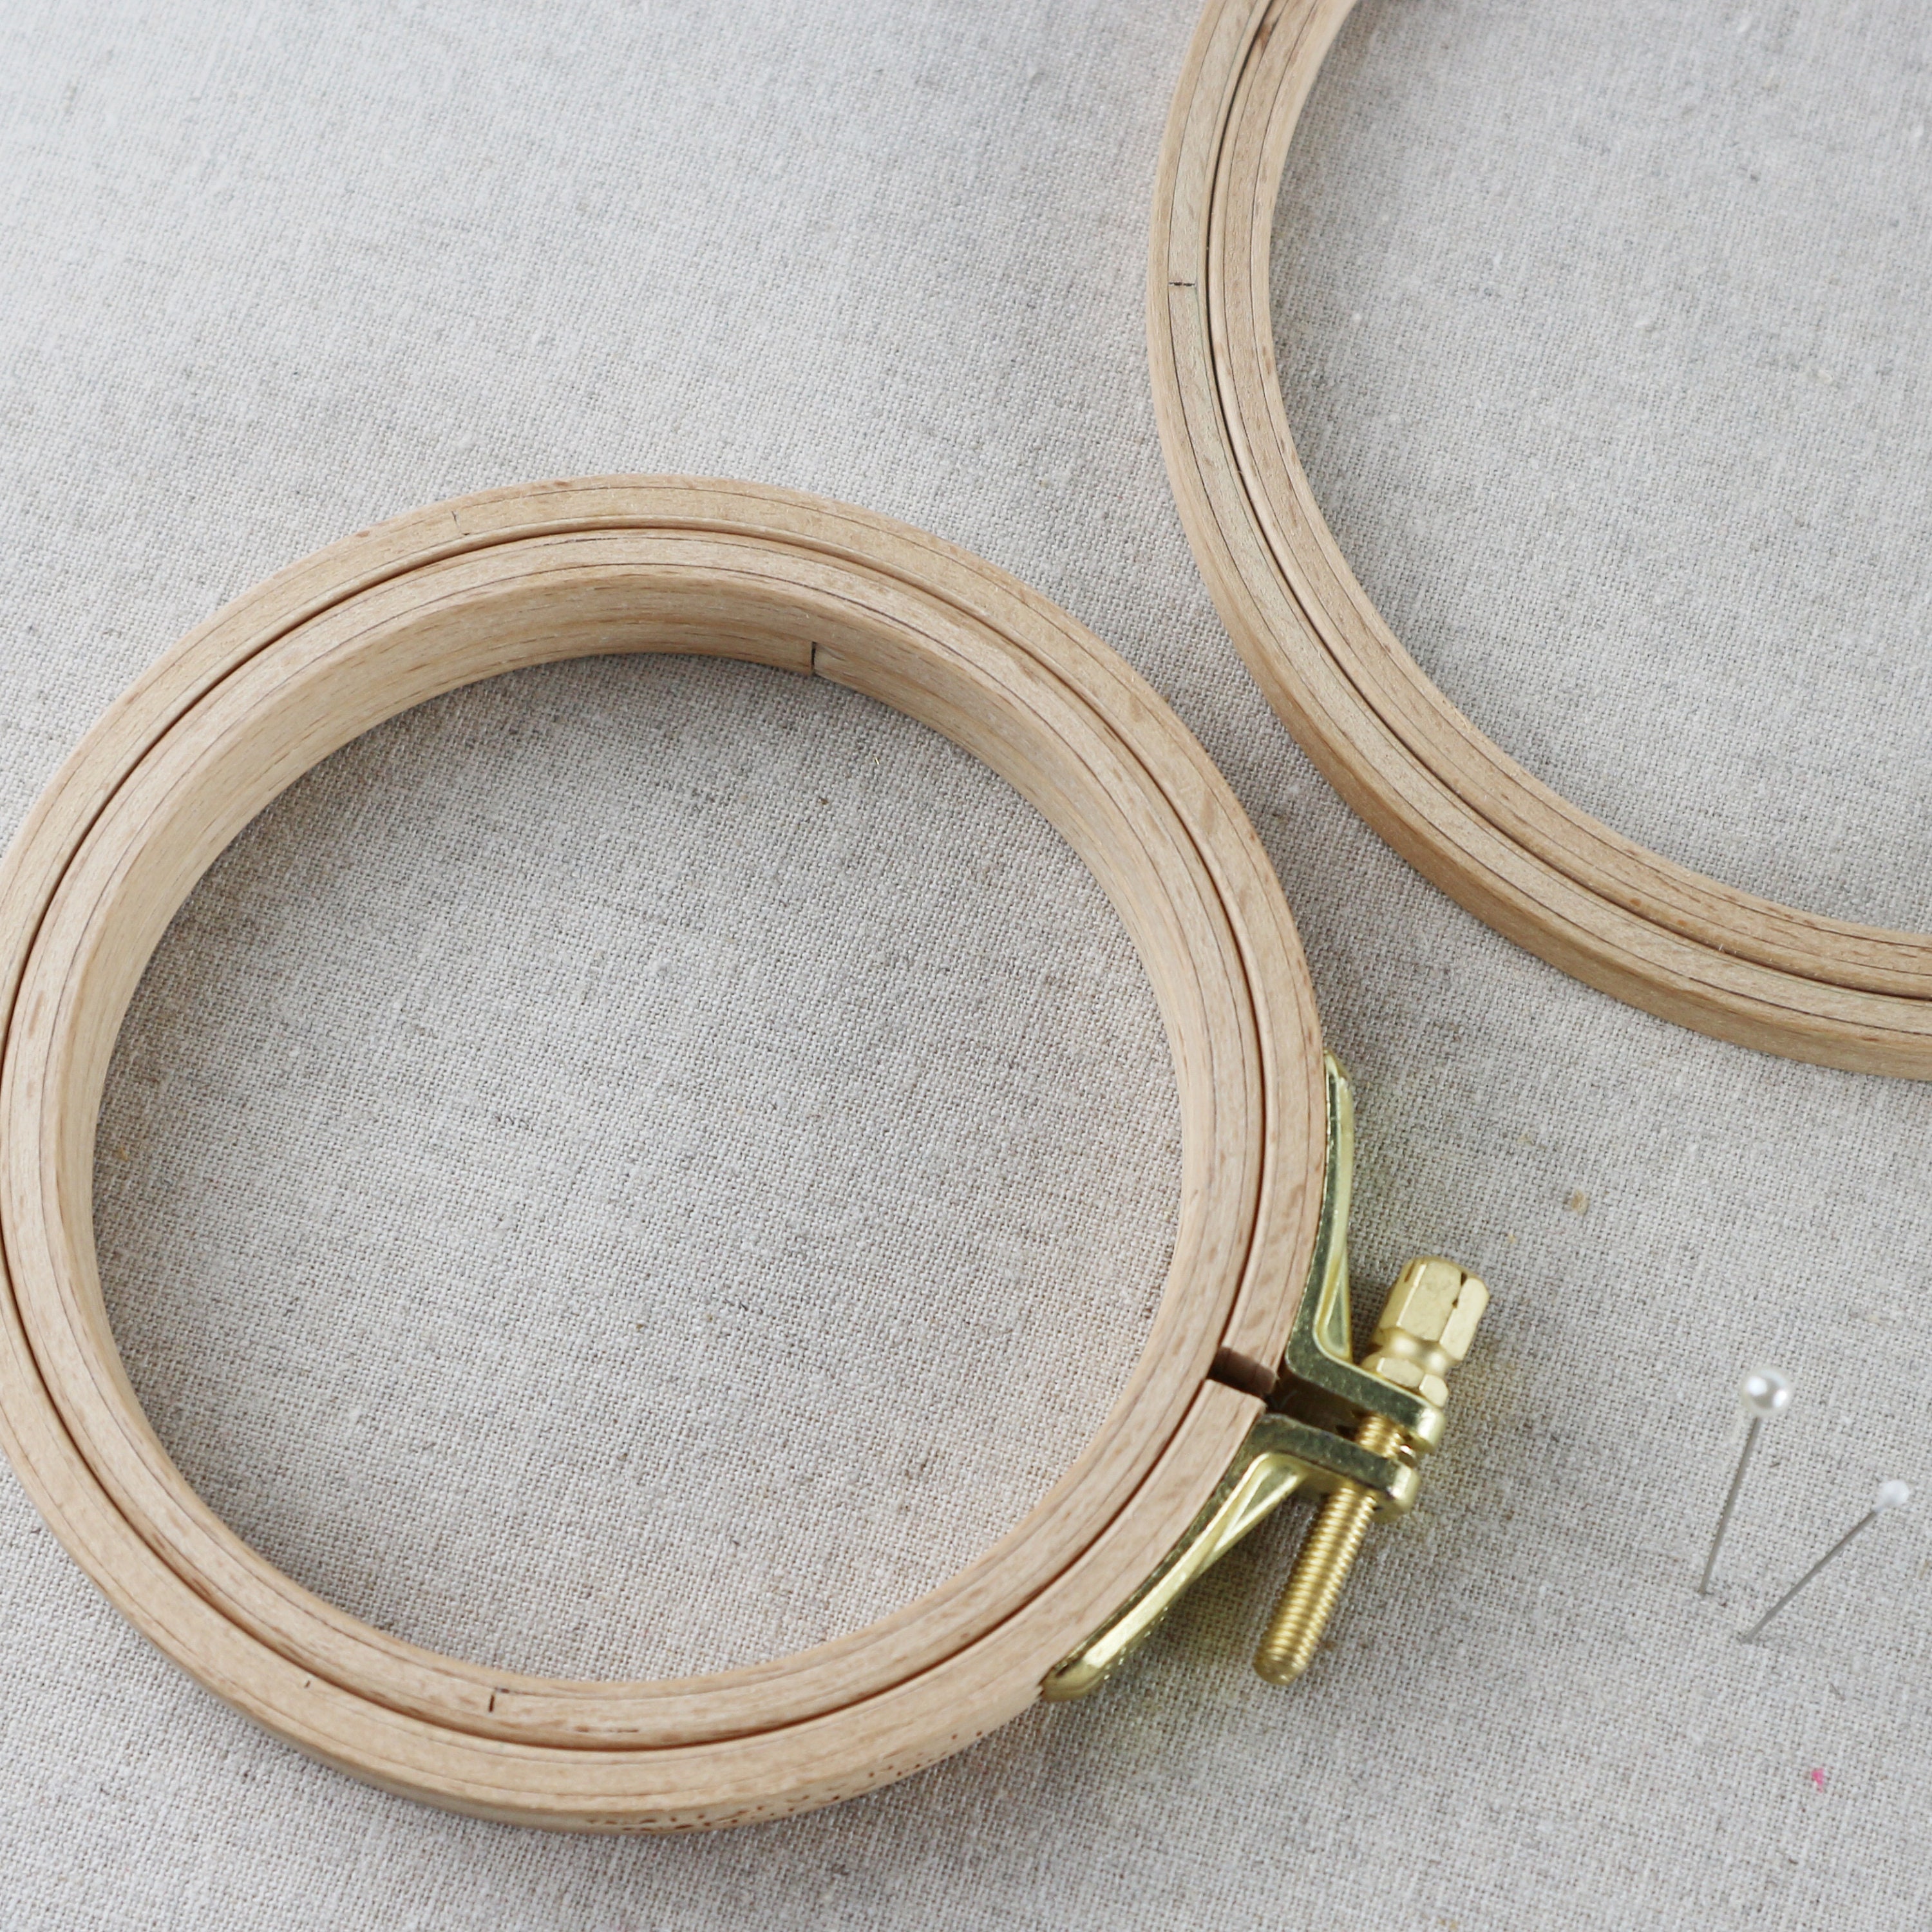 Vertical Oval Embroidery Hoop, Small Oval Embroidery Hoop. Wooden Embroidery  Hoop, Embroidery Hoop. Small Wooden Embroidery Hoop. 